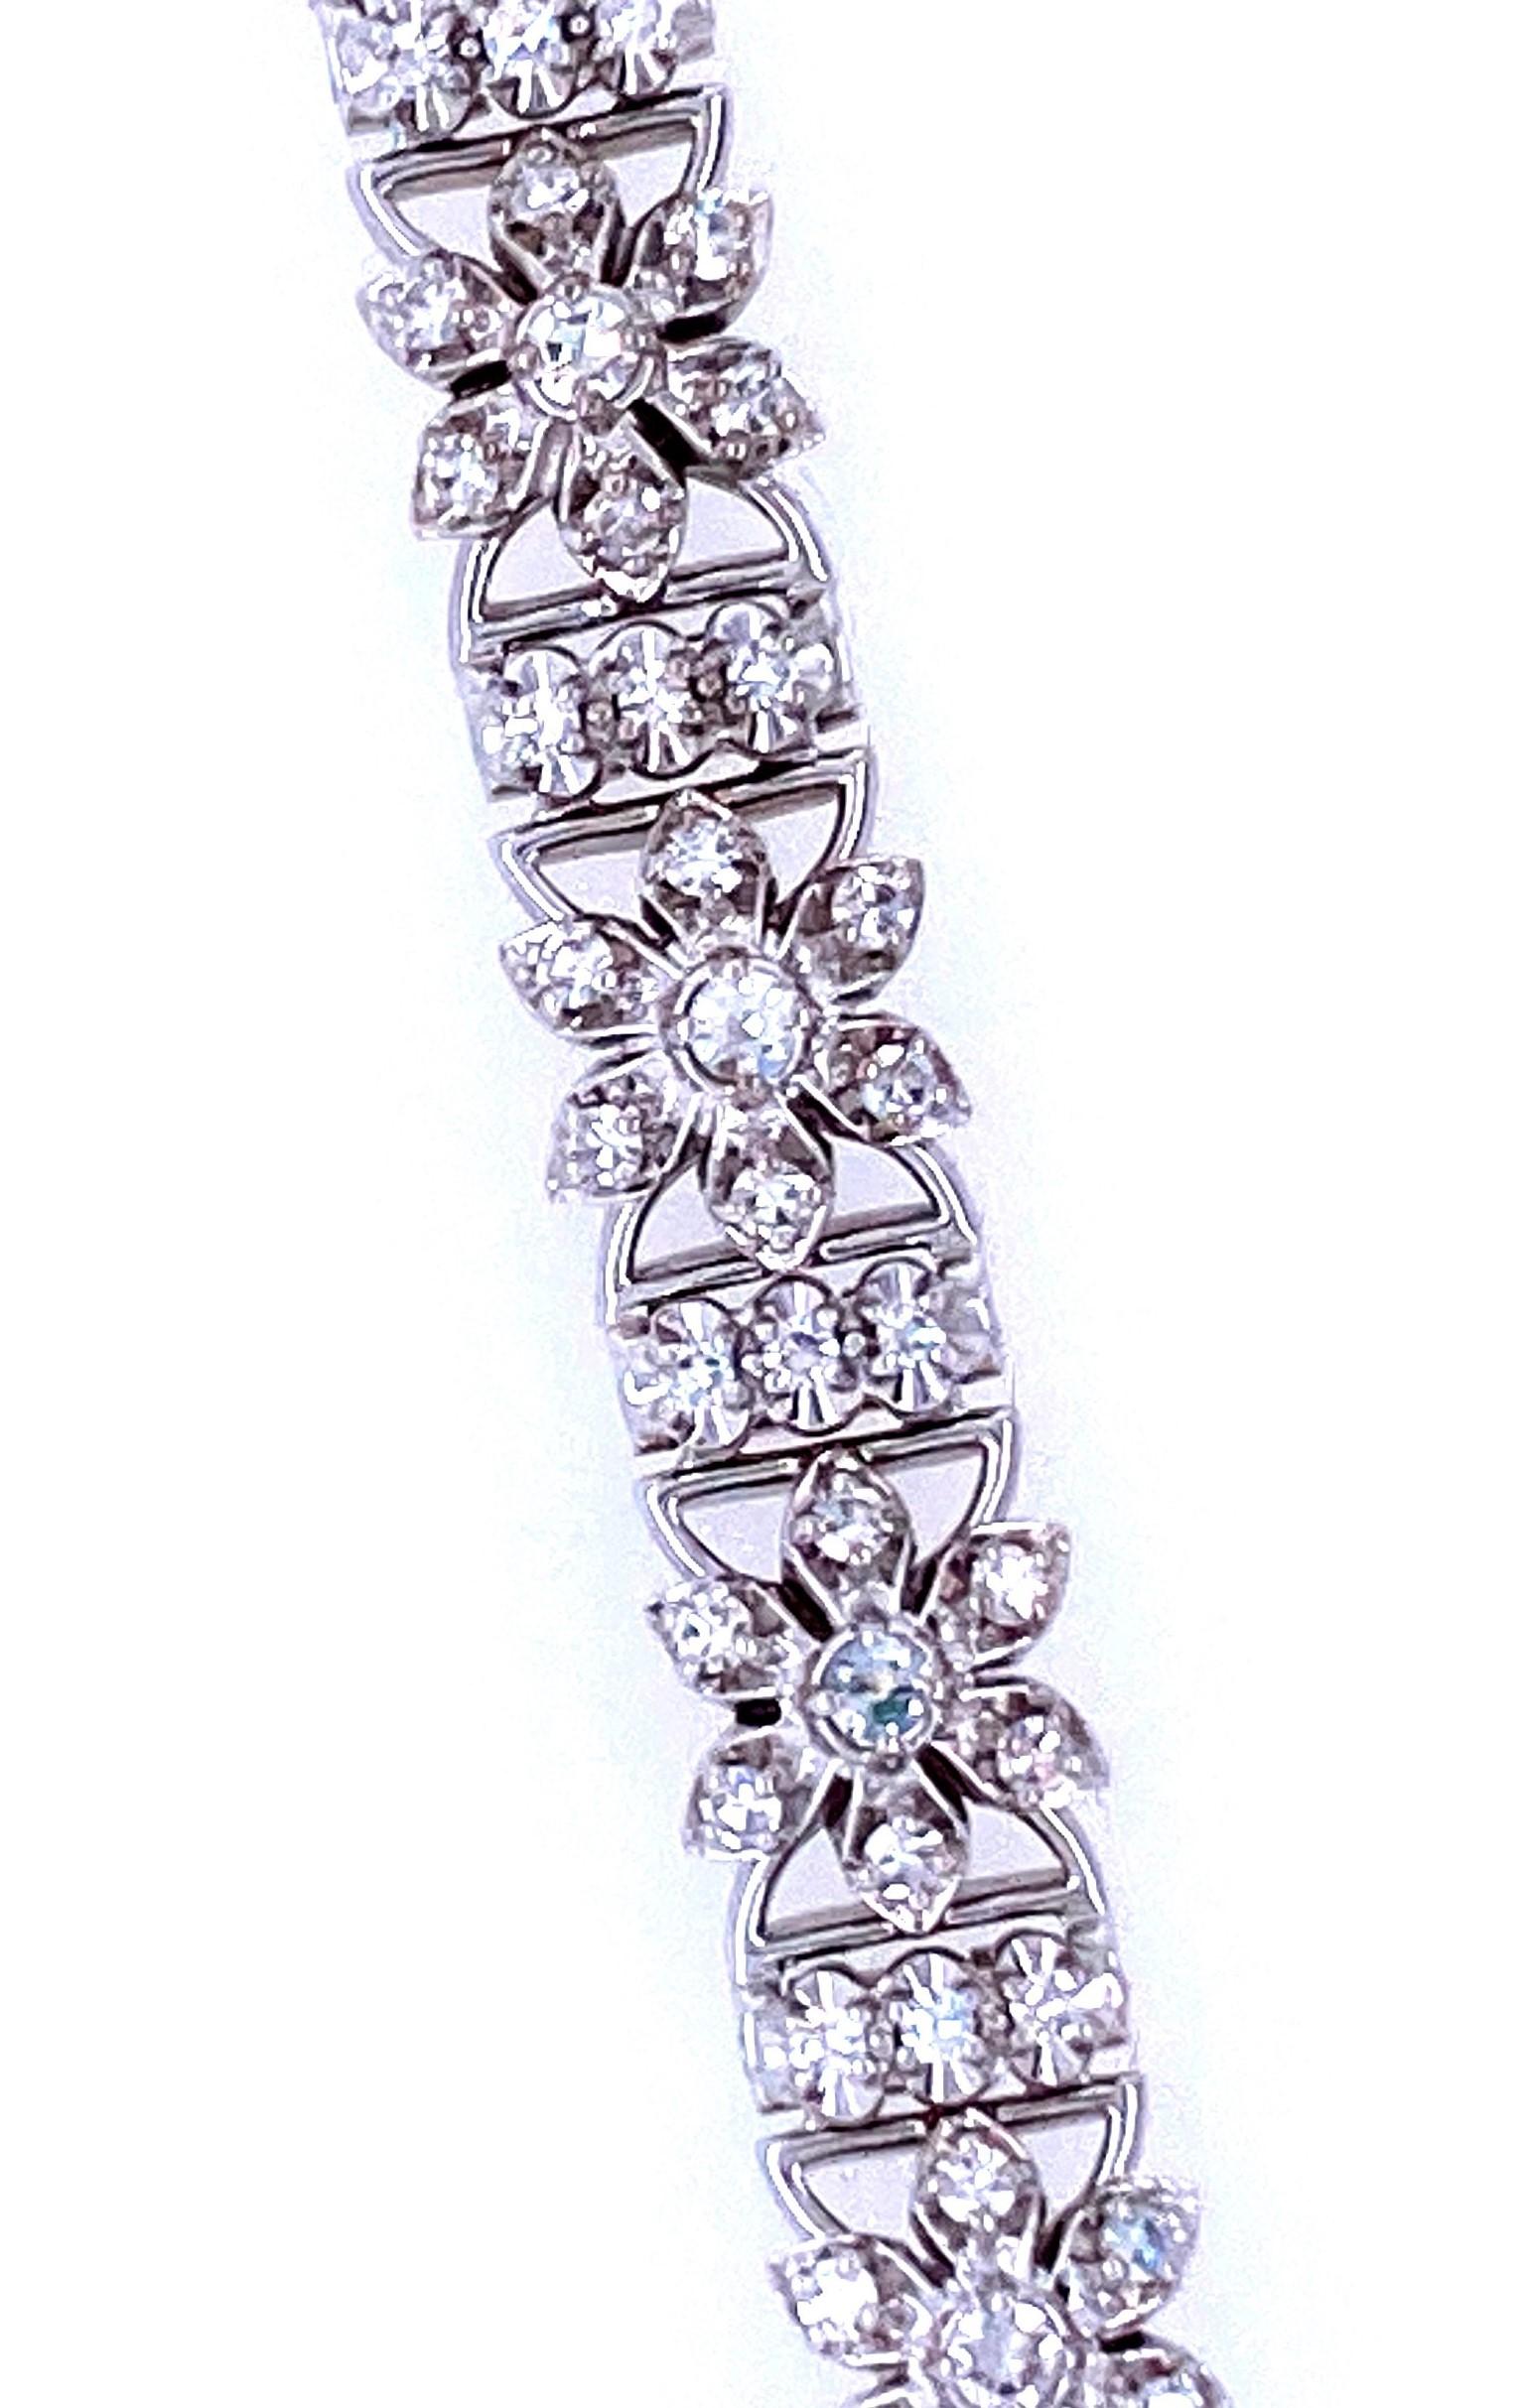 One 18 karat white gold (stamped 18K JABEL) diamond floral link bracelet set with 139 single cut diamonds, with H/I color and SI clarity. The bracelet measures 6.75 inches in length and 7.75mm wide and is secured with a box clasp and safety chain.